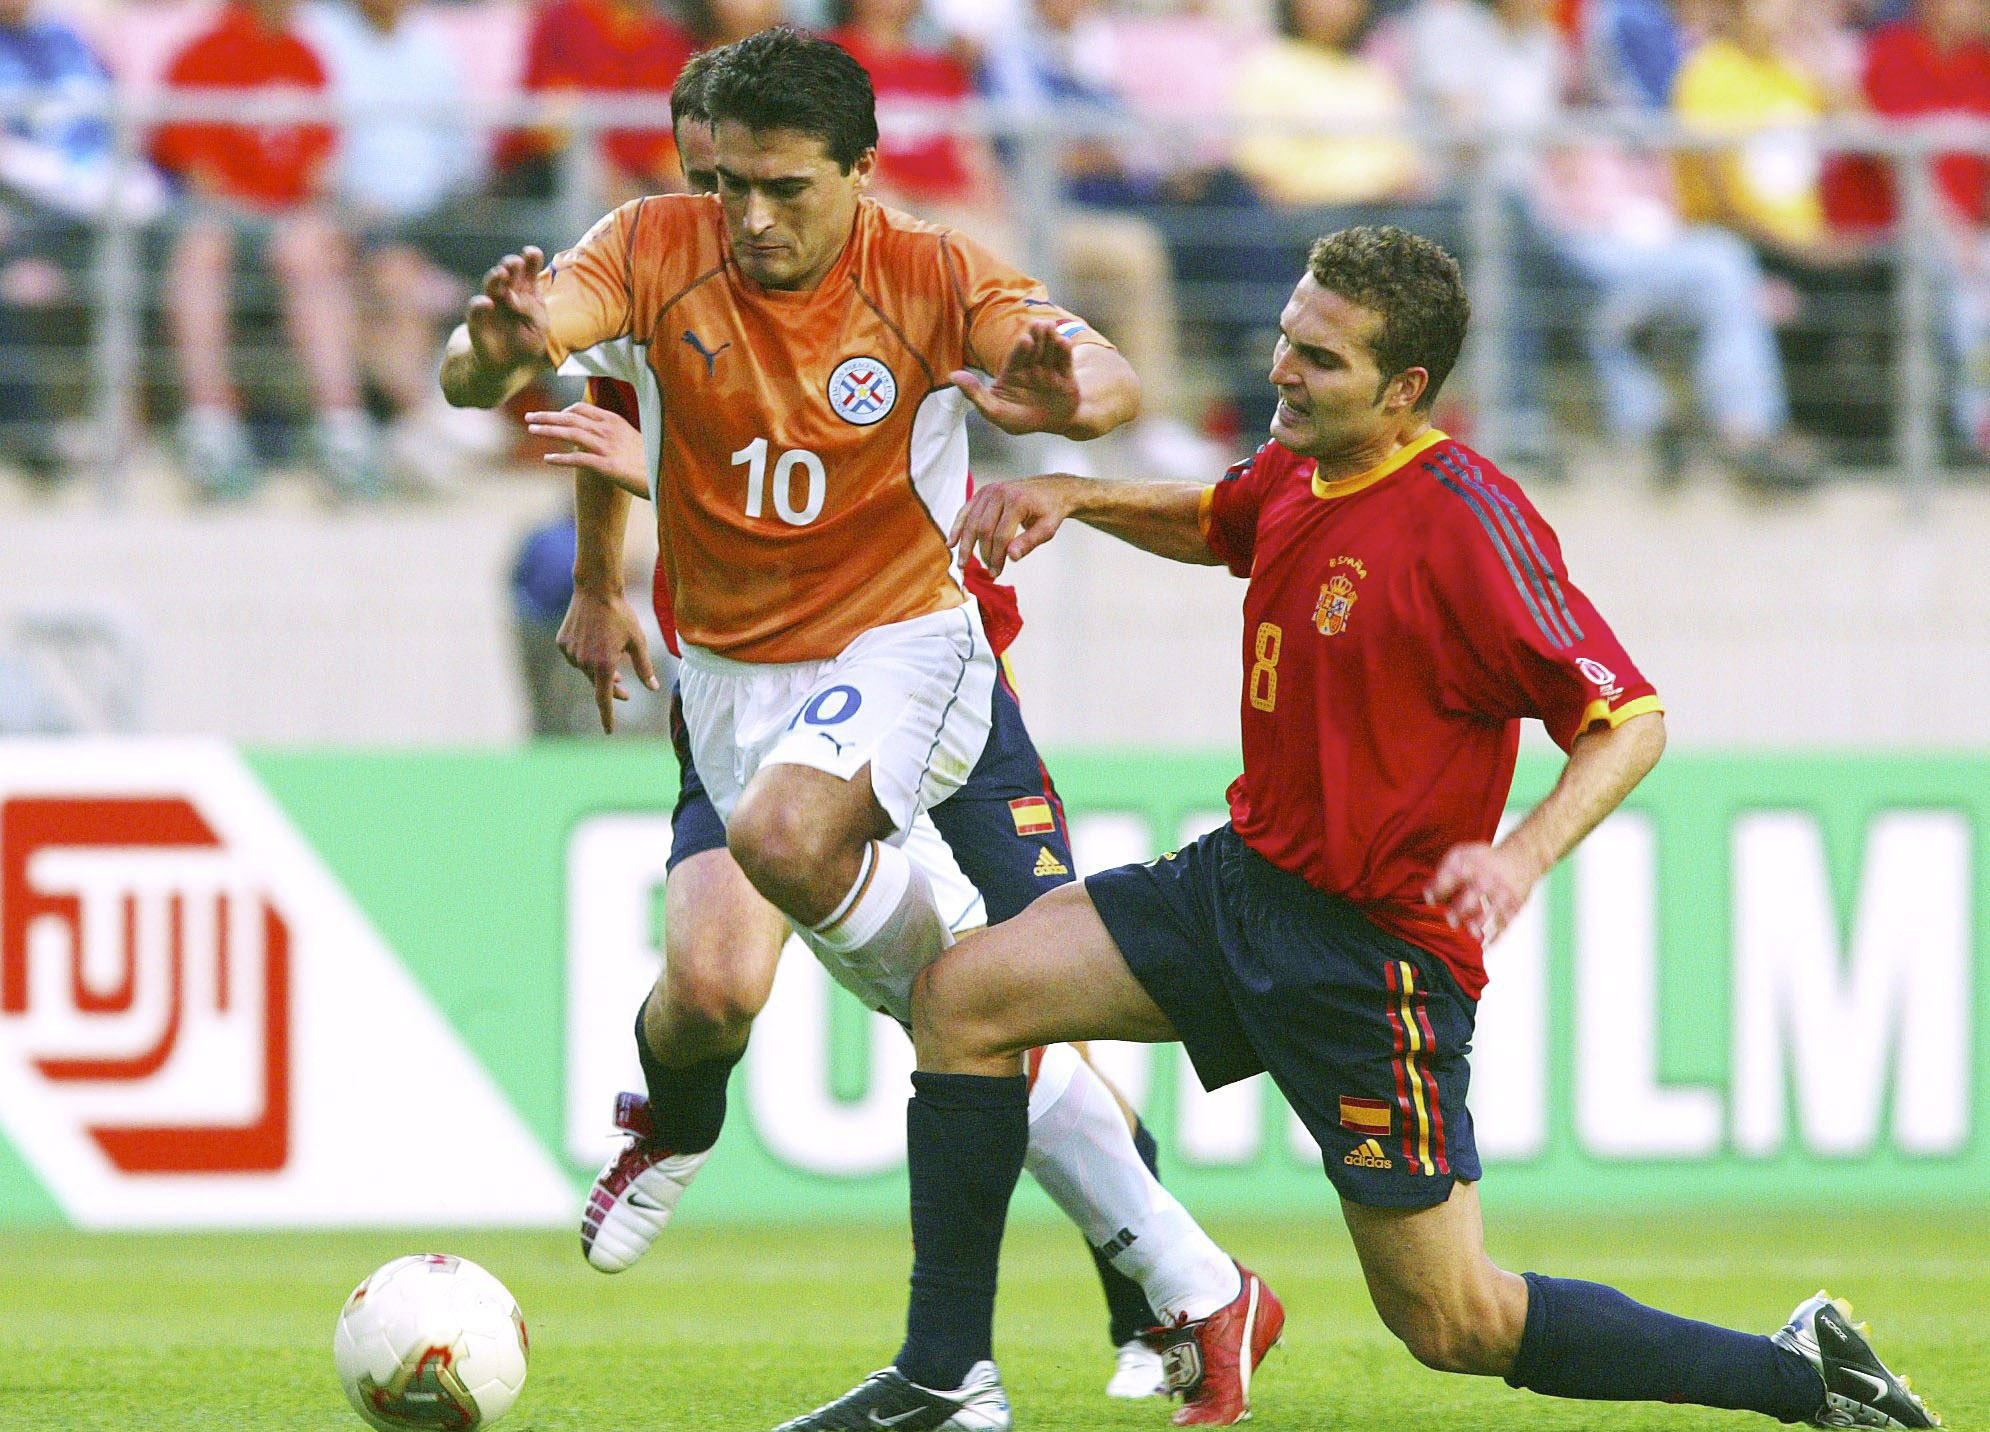 Spain's Ruben Baraja competes for the ball with Paraguay's Roberto Acuña at the 2002 World Cup.